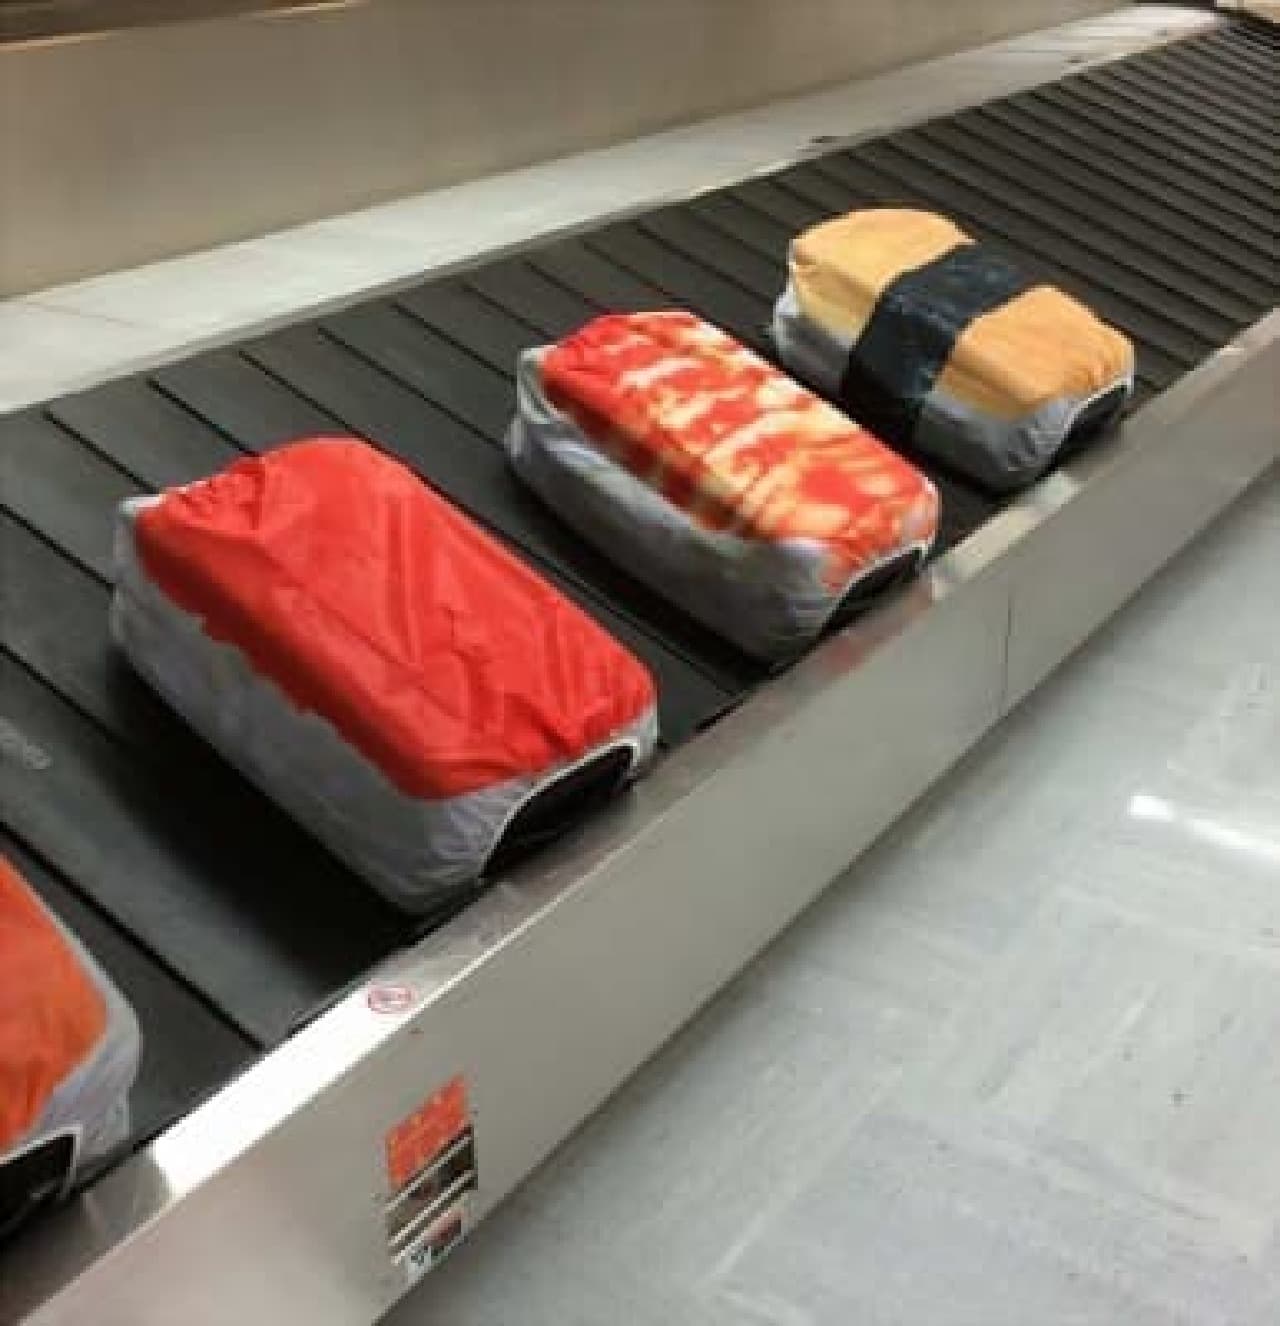 The luggage lane at the airport becomes a huge conveyor belt sushi!